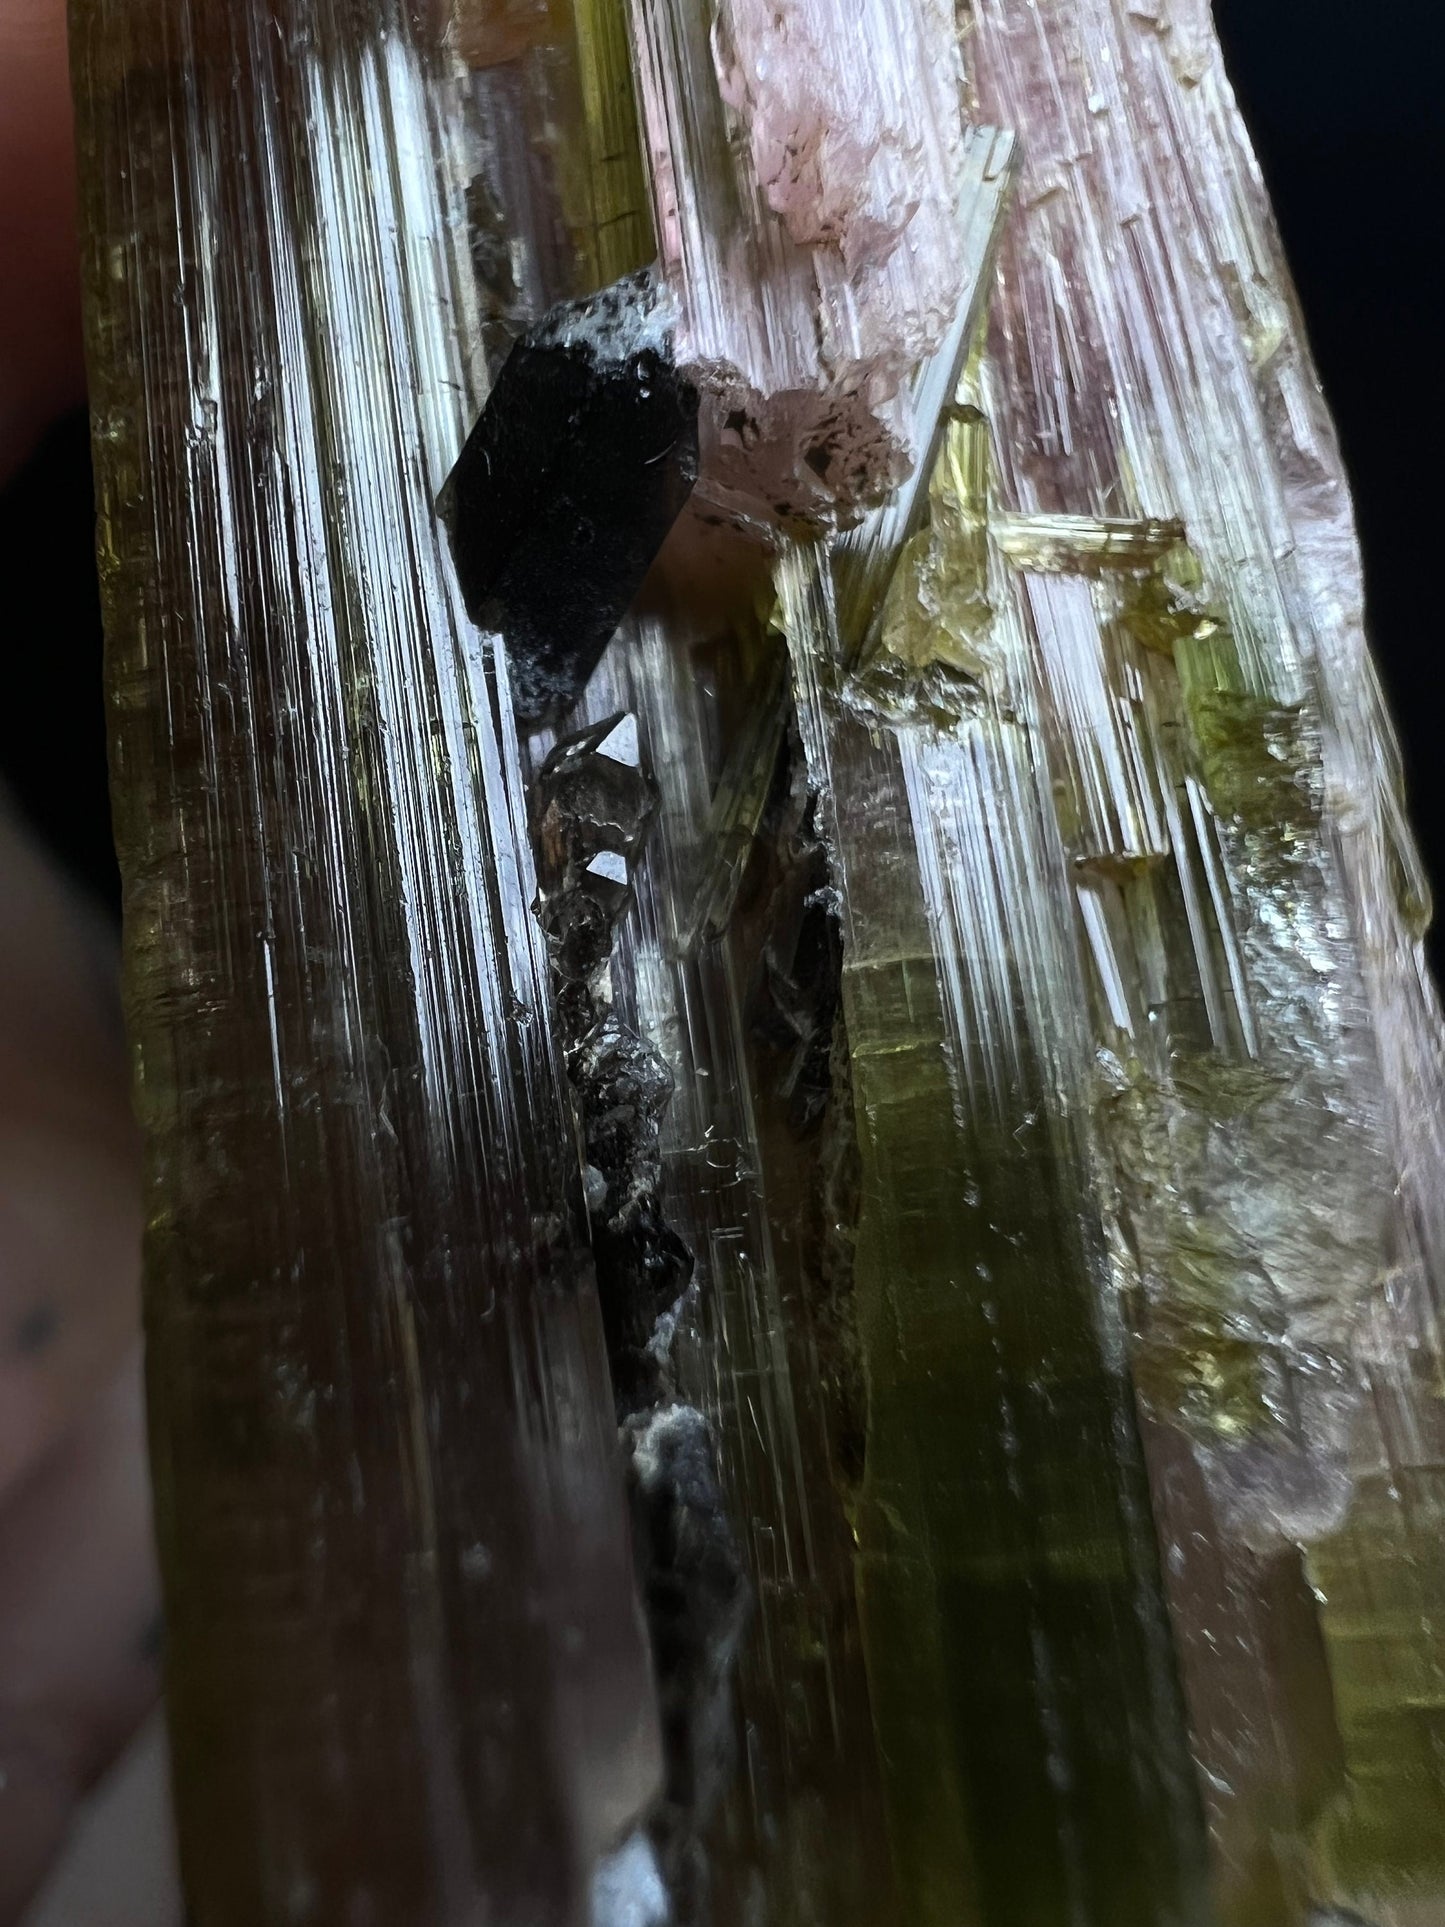 Single Termination Watermelon Tourmaline With Black Tourmaline Piercing Through From Brazil (Self Healed) - Collectors Piece